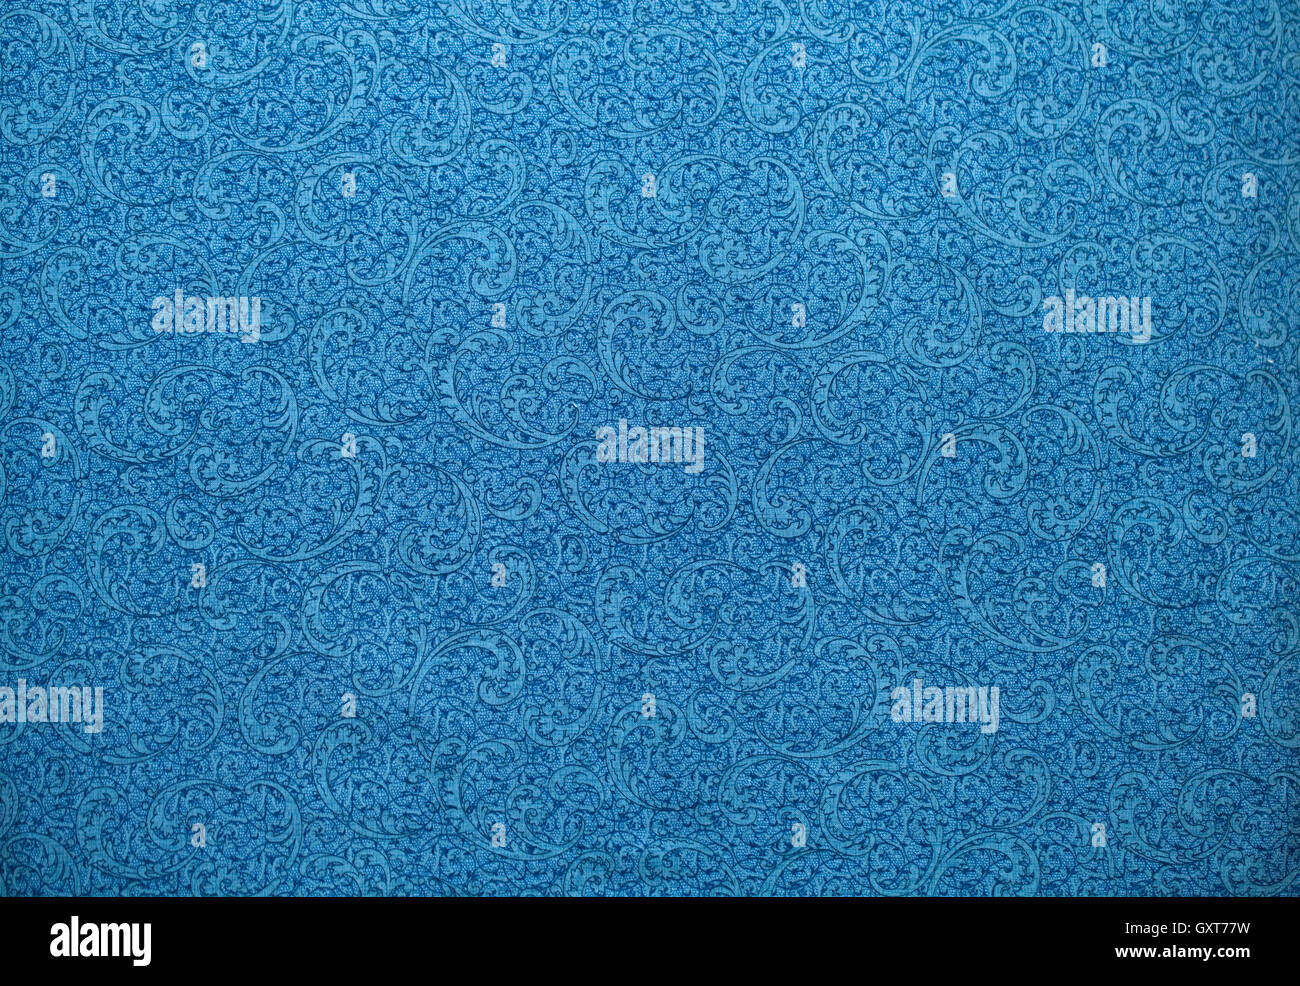 Fabric texture with pattern Stock Photo